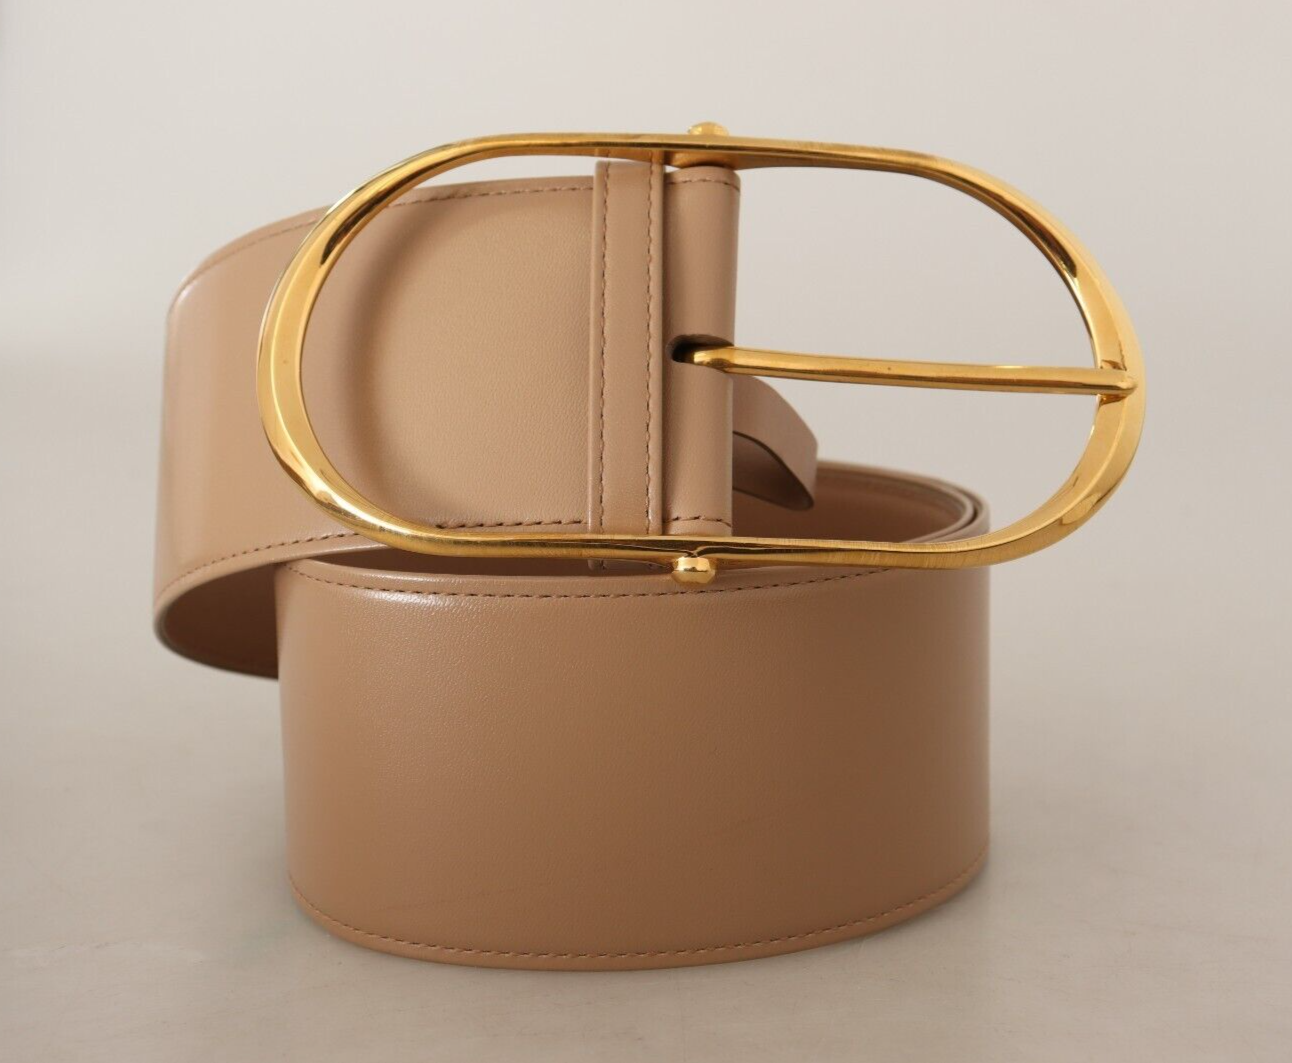 Elegant Beige Leather Belt with Gold Oval Buckle